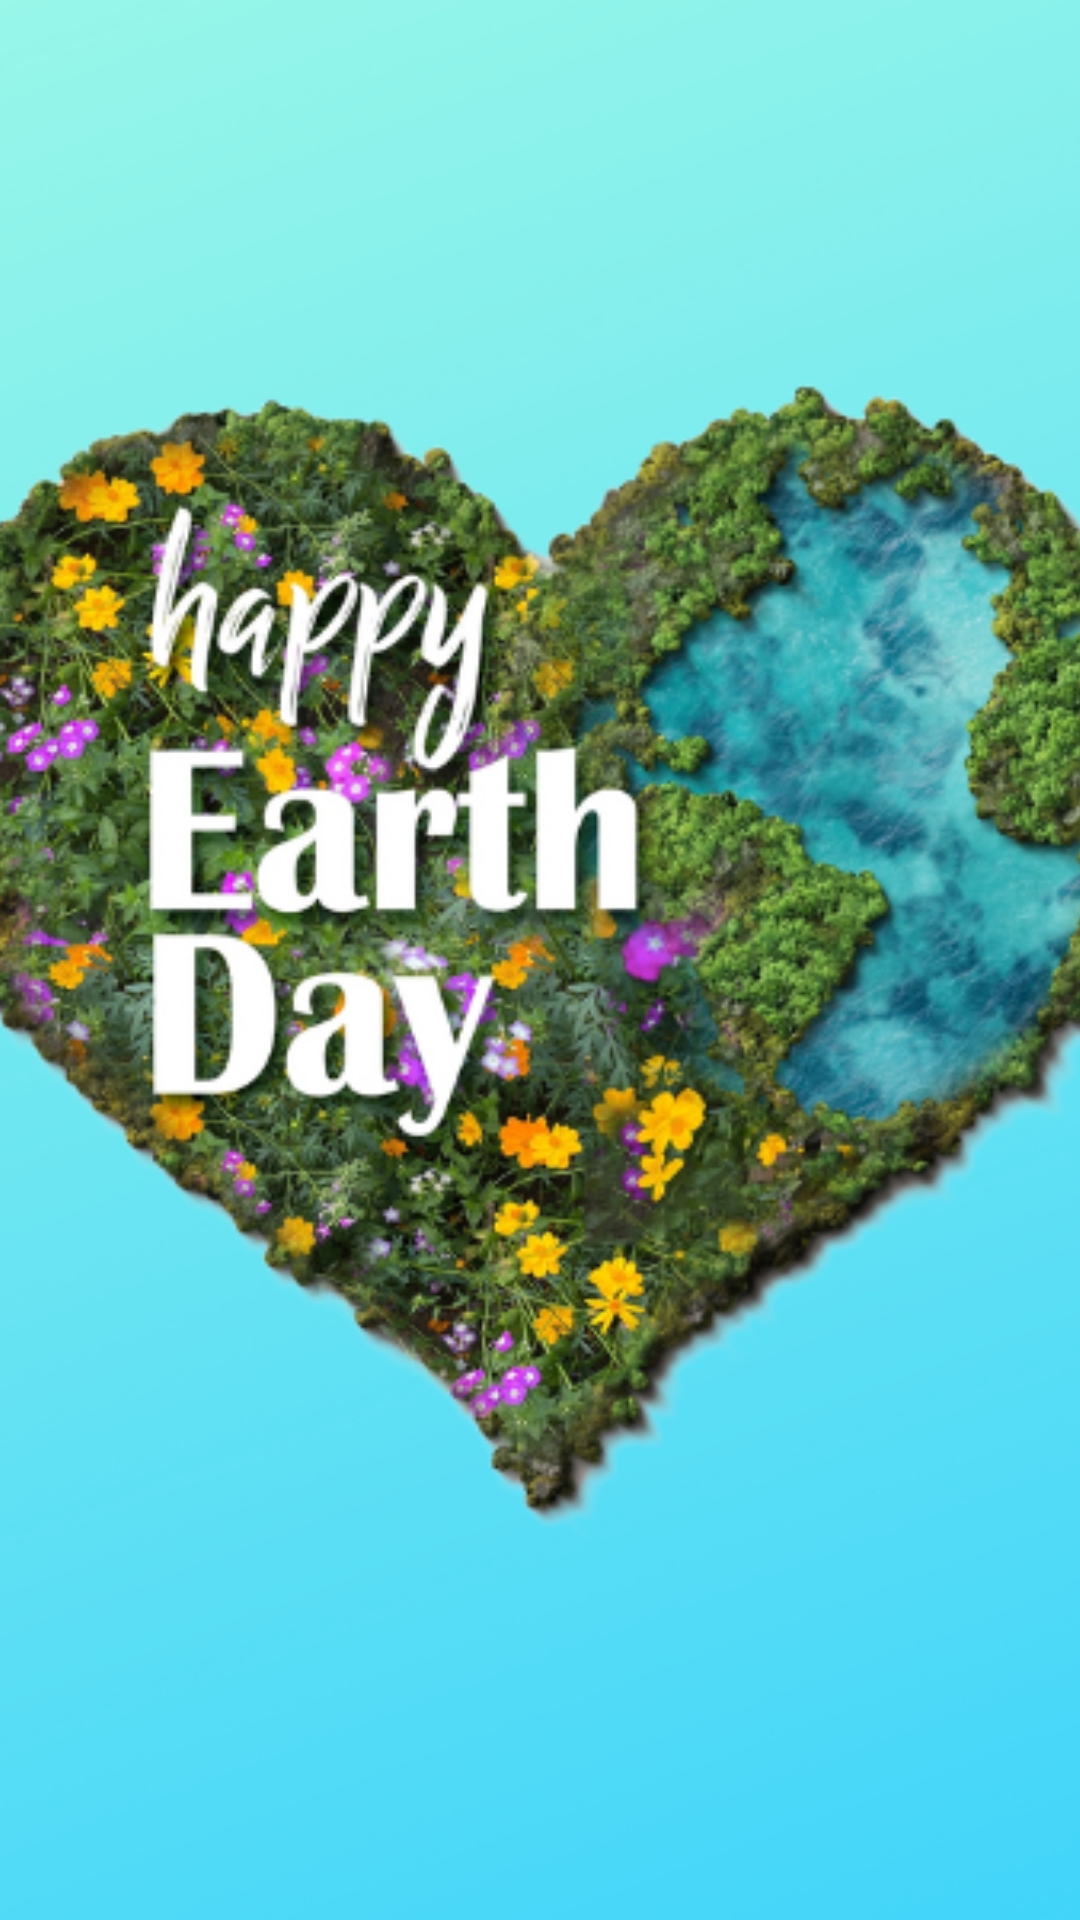 5 Earth Day facts you might not know